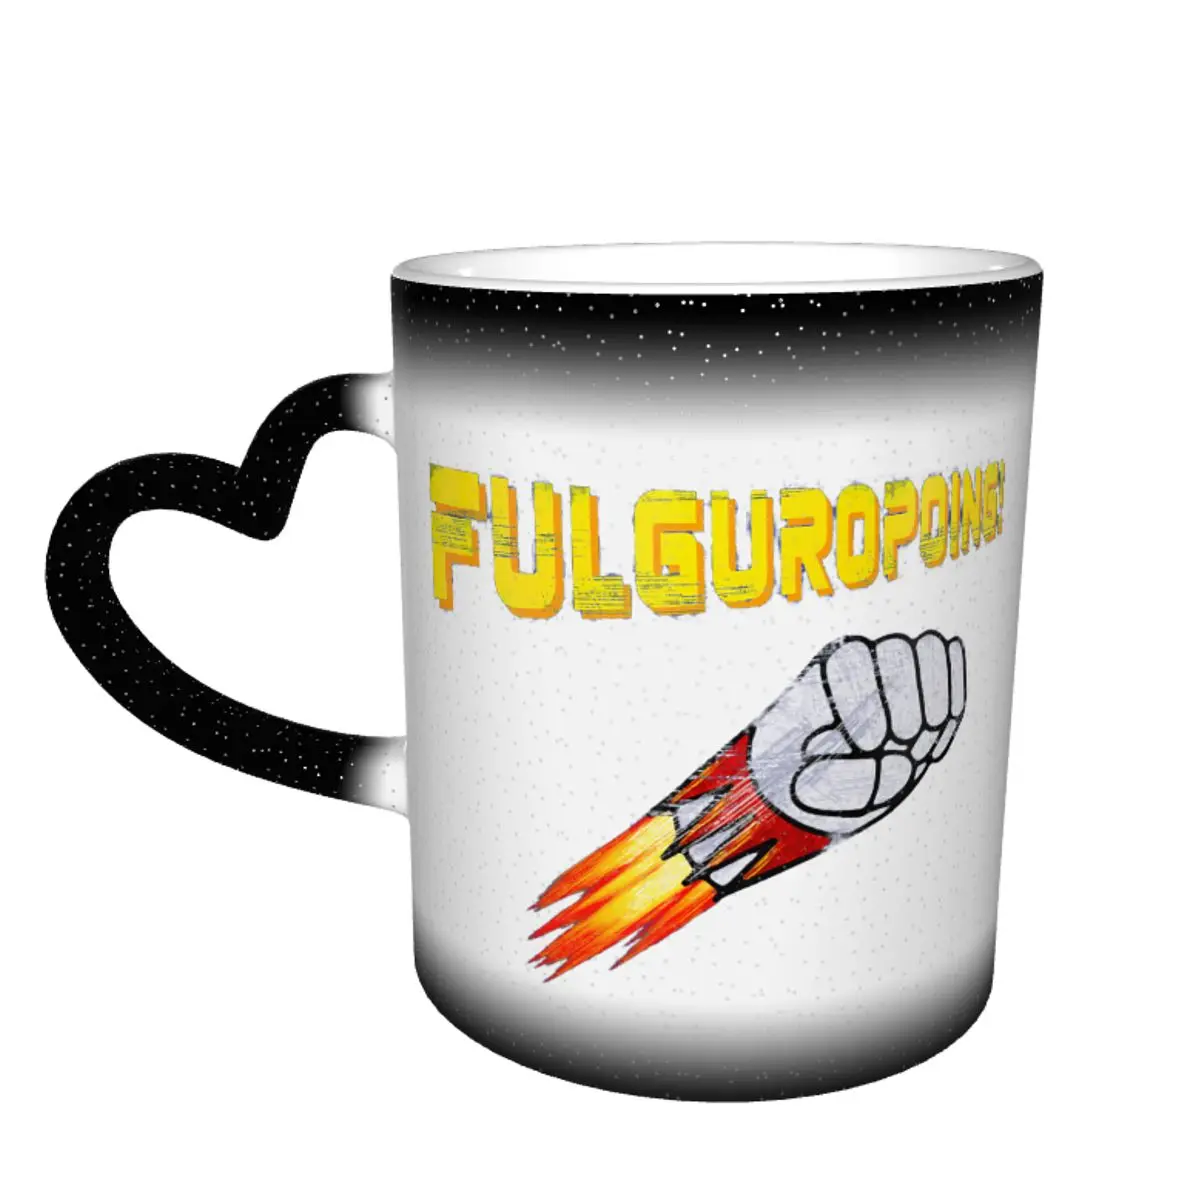 

Fulguropoing Goldoraks Color Changing Mug in the Sky Top Quality Ceramic Heat-sensitive Cup Humor Graphic R348 Coffee cups